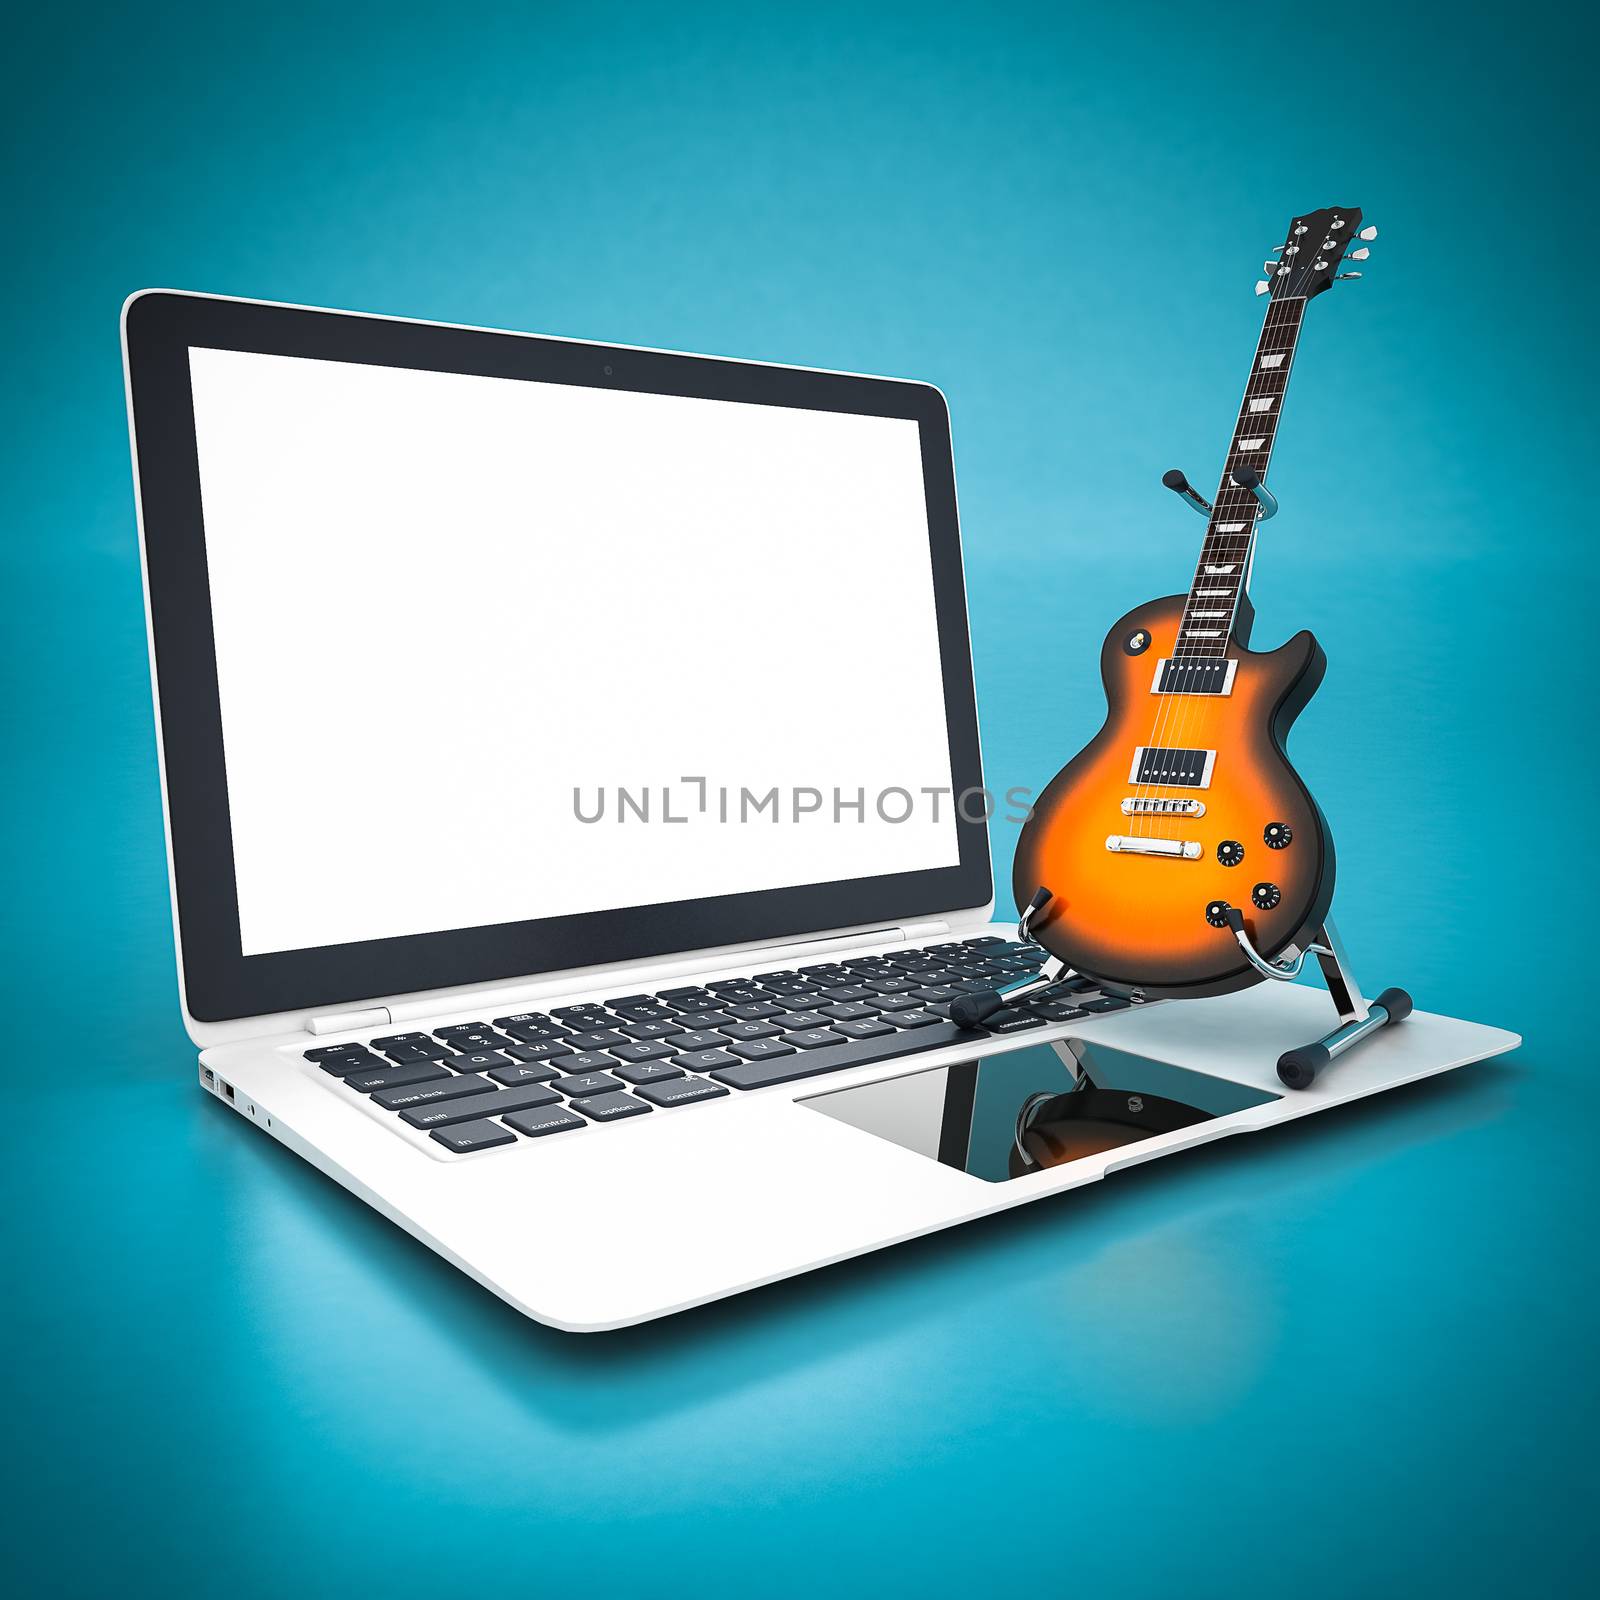 Electric guitar and white laptop on a blue background